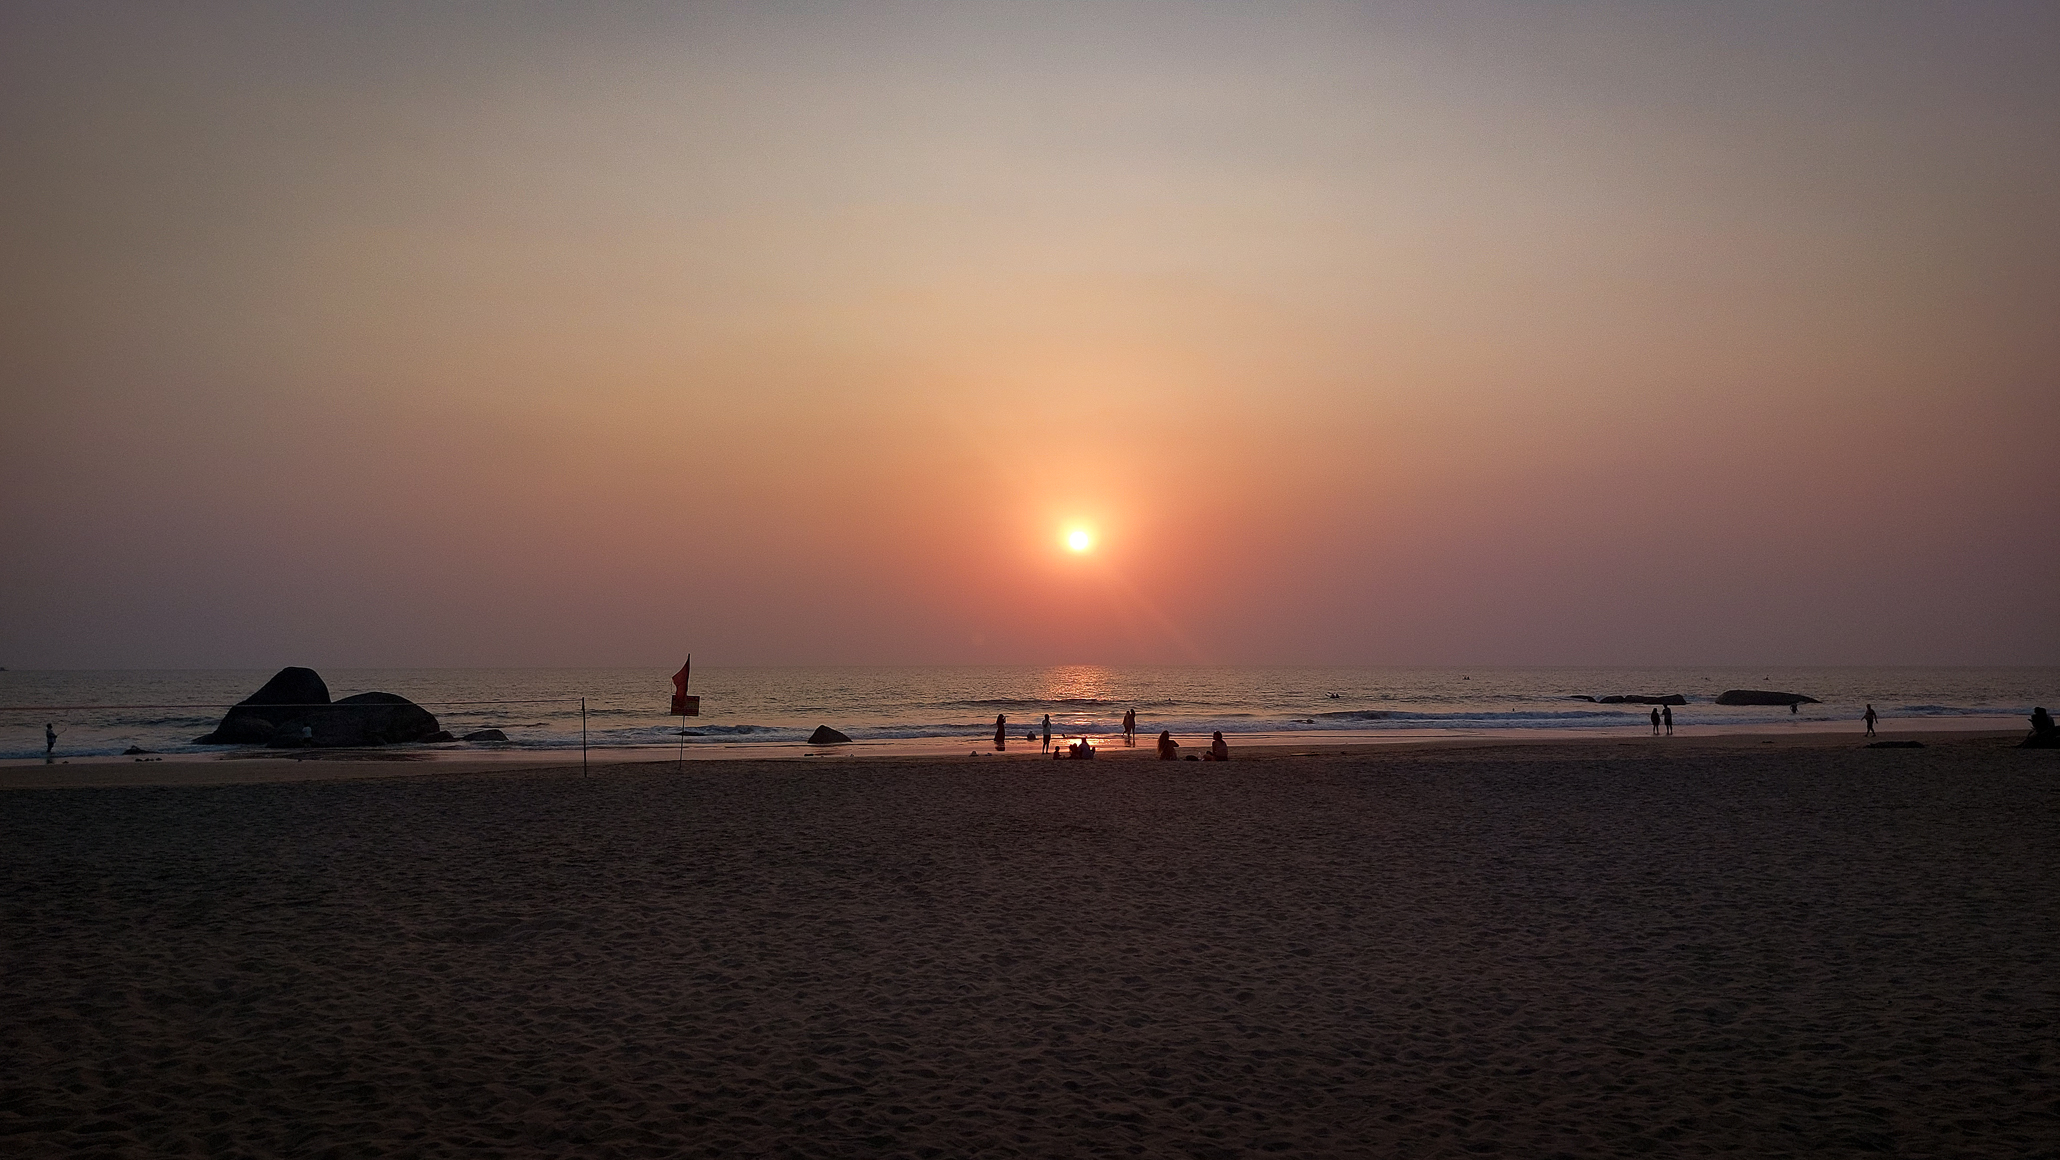 <span  class="uc_style_uc_tiles_grid_image_elementor_uc_items_attribute_title" style="color:#ffffff;">Beautiful sunset in 'Agonda' a pretty touristic village that often is visited by yoga people</span>